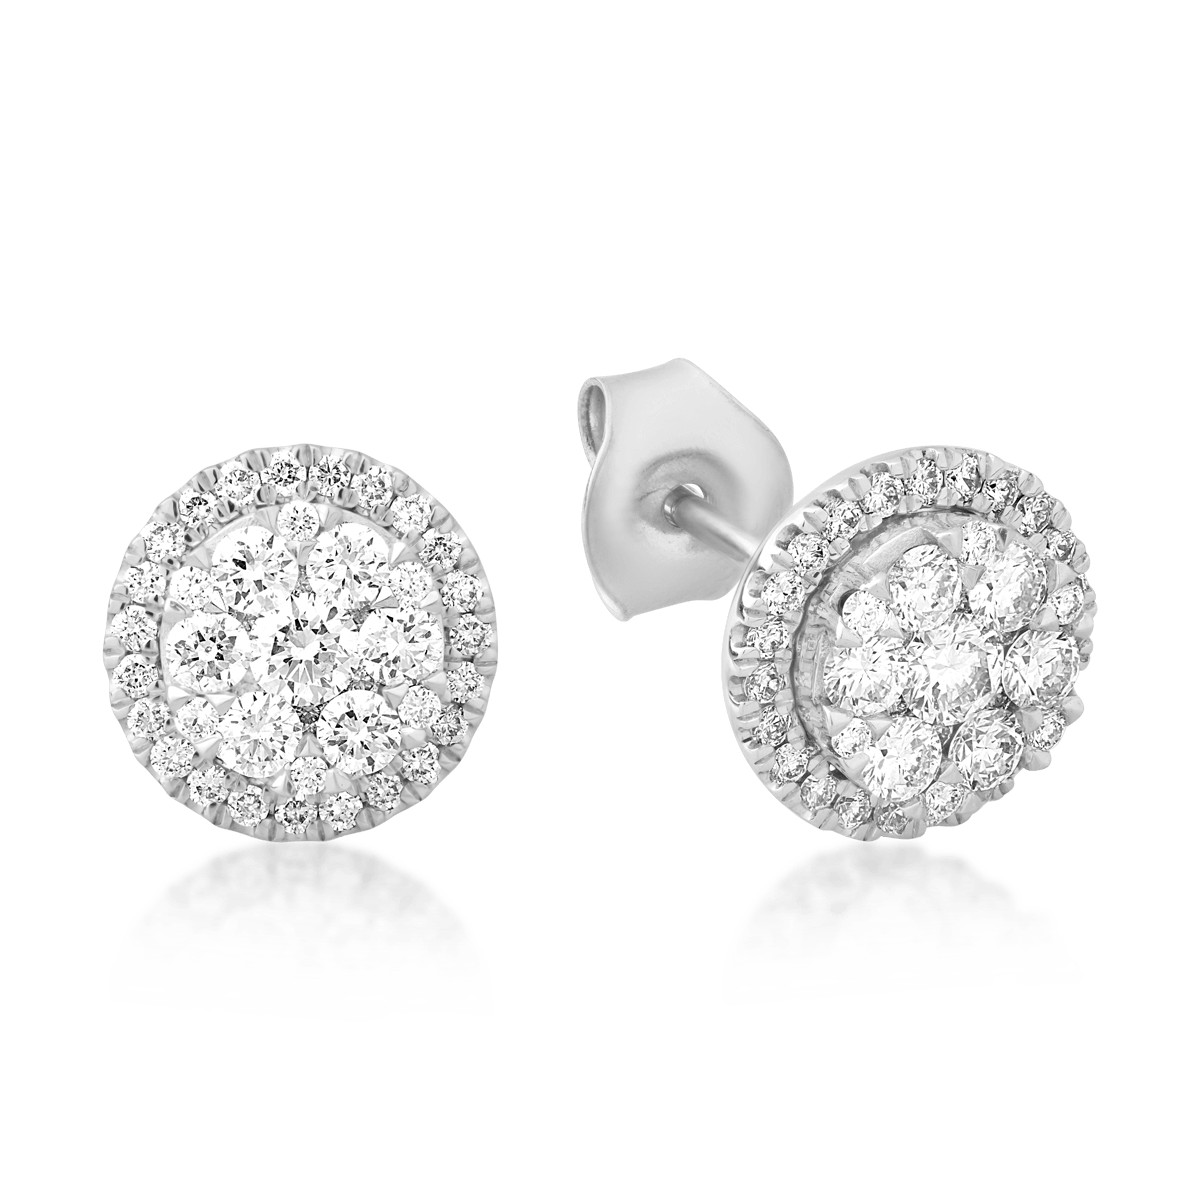 18K white gold earrings with 0.659ct diamonds